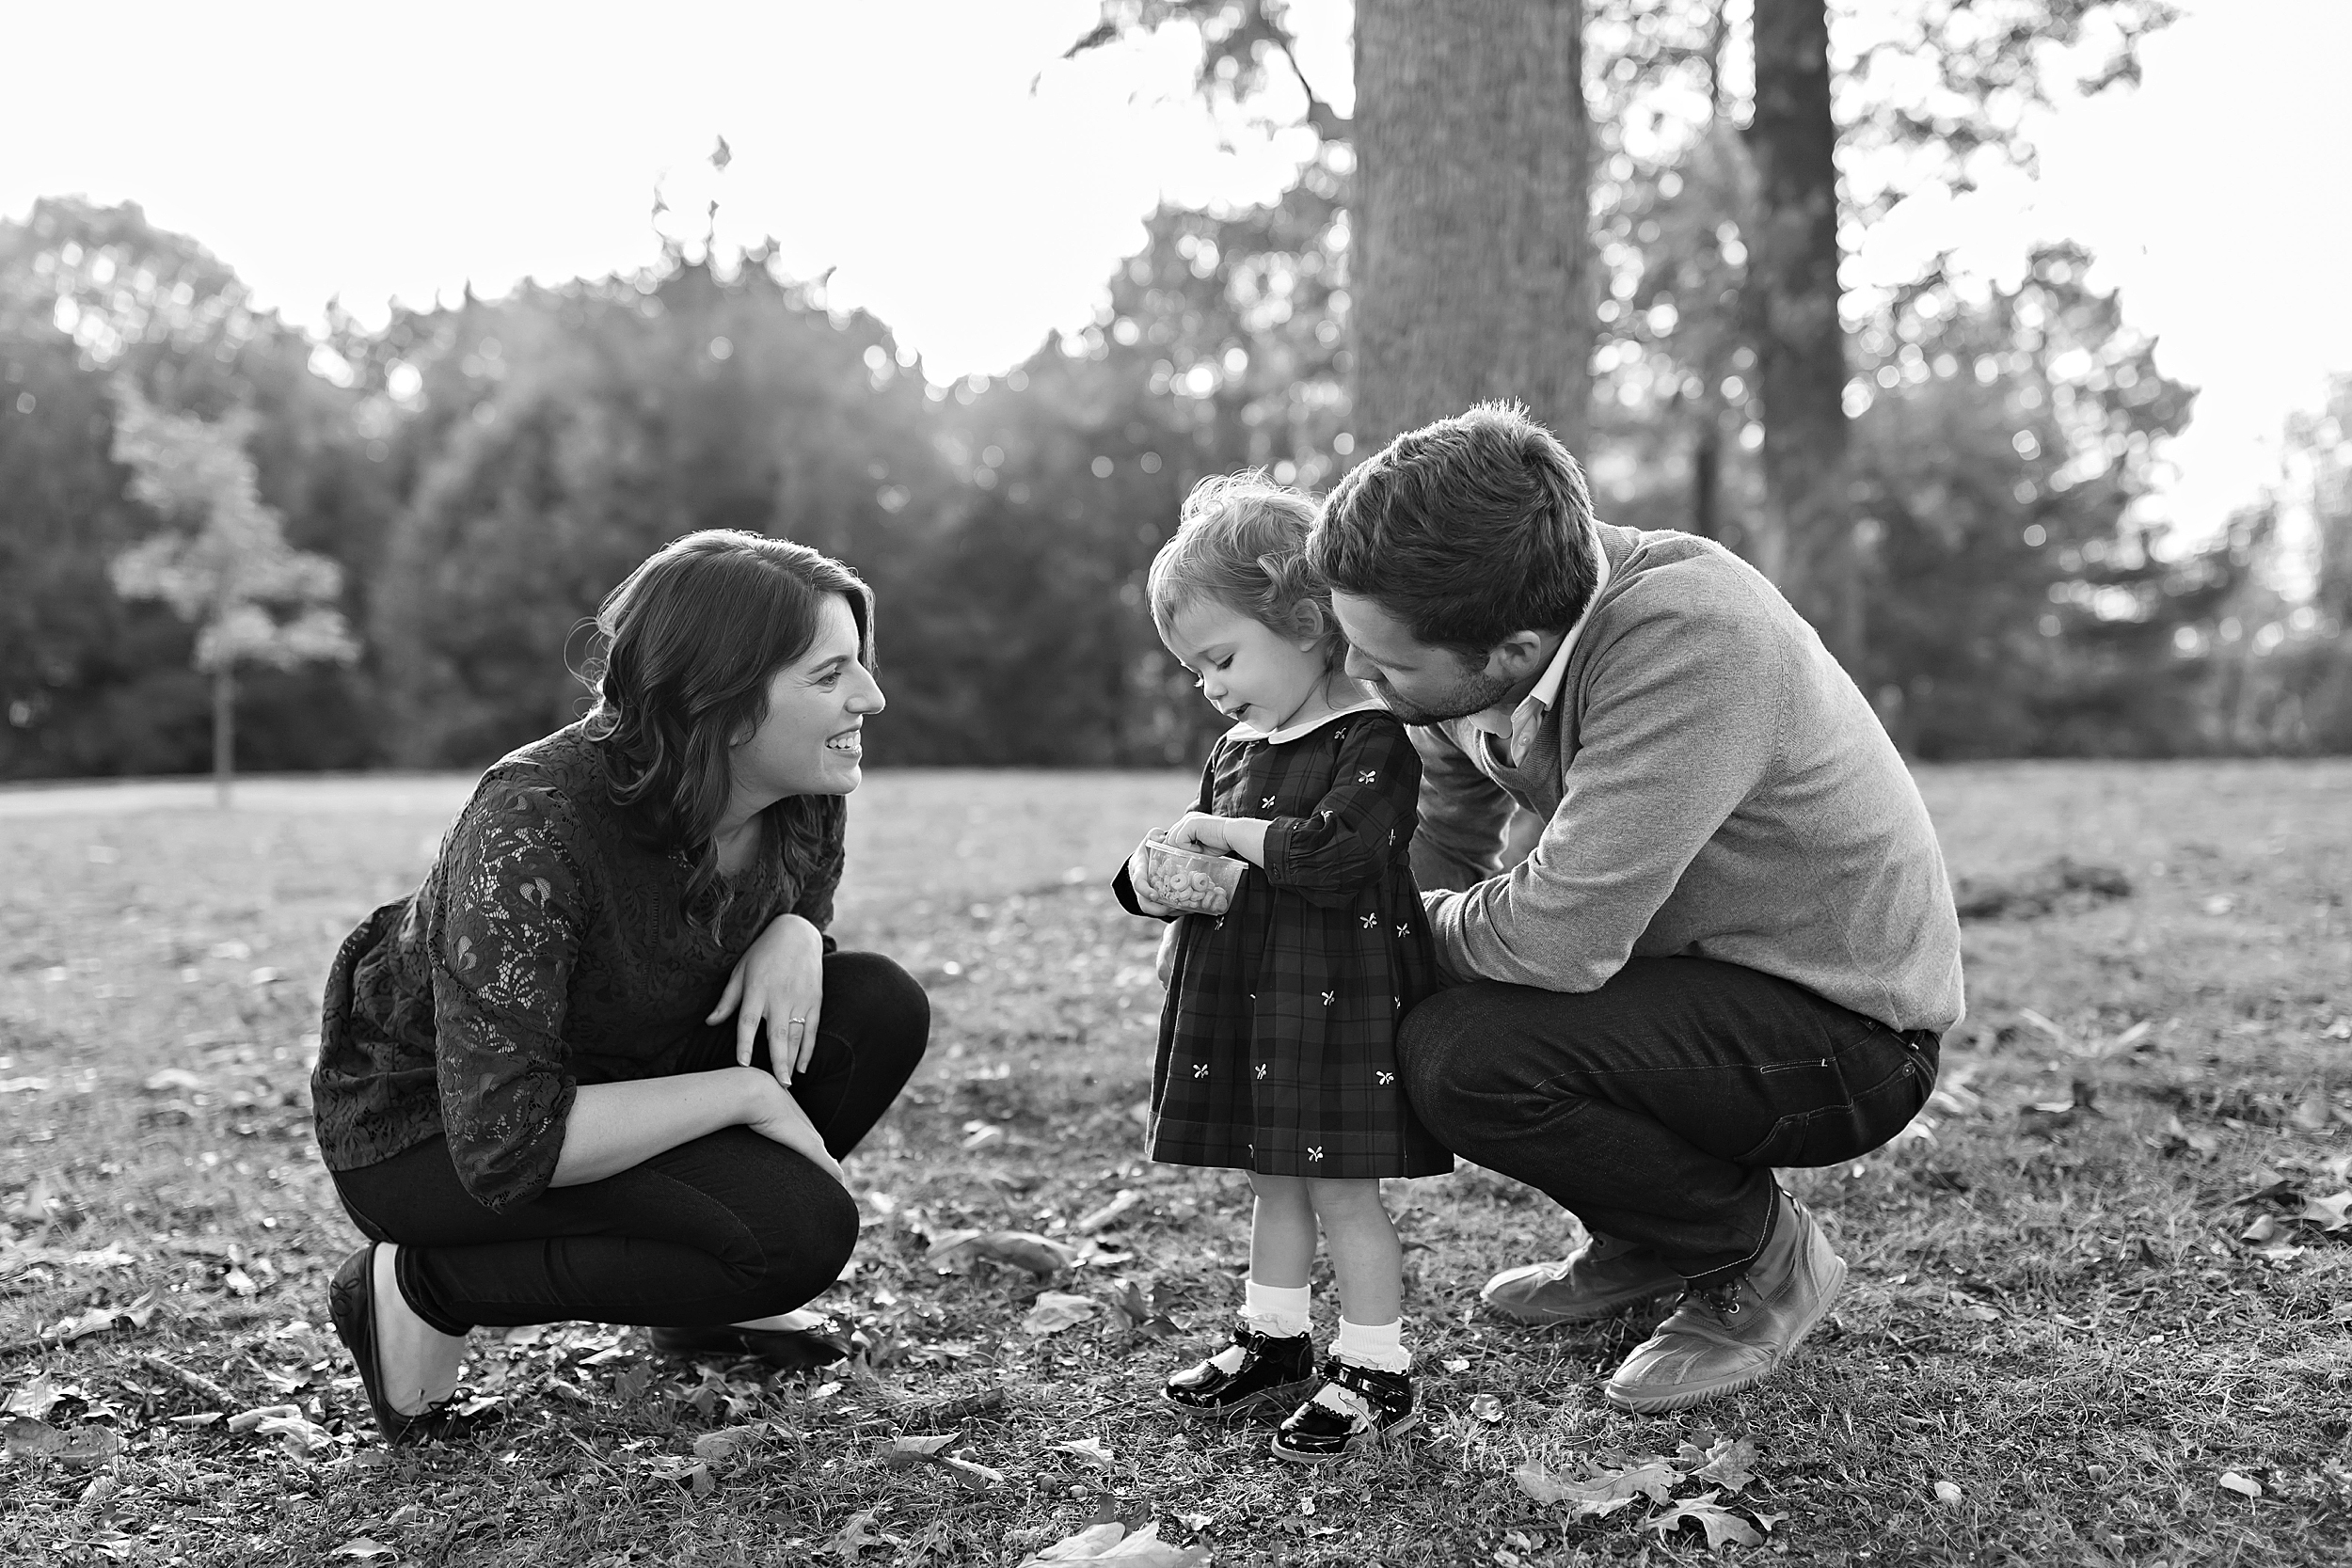 atlanta-buckhead-brookhaven-decatur-lily-sophia-photography-photographer-portraits-grant-park-intown-outdoor-family-sunset-session-toddler-baby-girl_0002.jpg